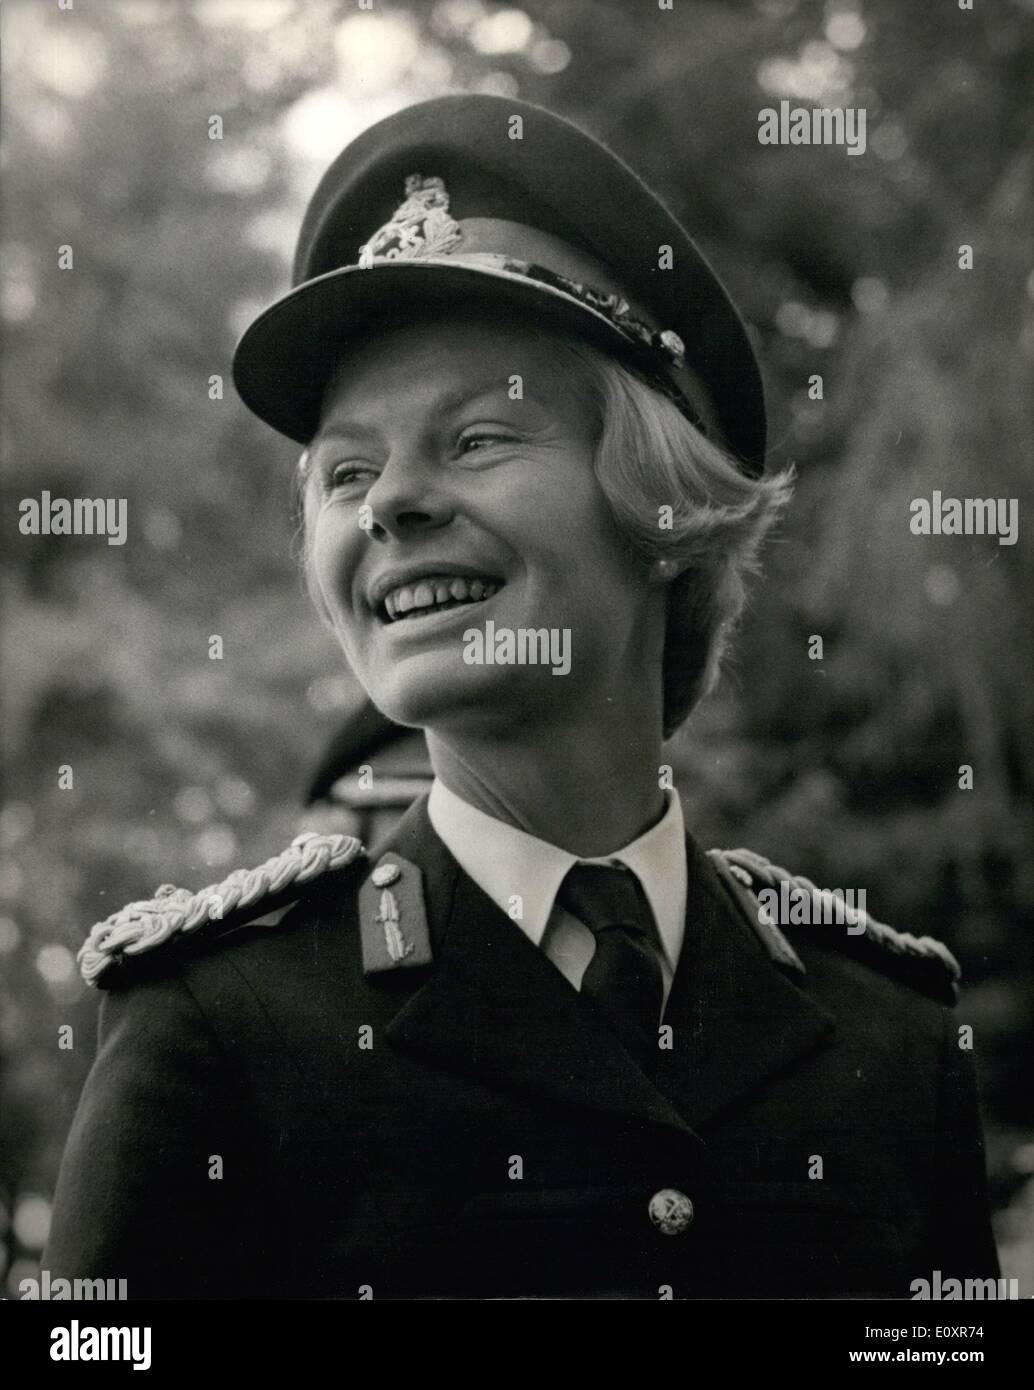 Aug. 08, 1967 - The Duchess Of Kent At Cadet Commissioning Ceremony At The WRAC College - Camberley: The Duchess of Kent ore the dark green uniform of Controller Commandant of the Women's Royal Army Corps for the first time today when she different officiated at the commissioning ceremony of 14 cadets at the WRAC College, Camberley, Surrey. The uniform included the insignia of the rank of Major General, with gold apaulettea, guilt and scarlet sash, and forget patches Stock Photo